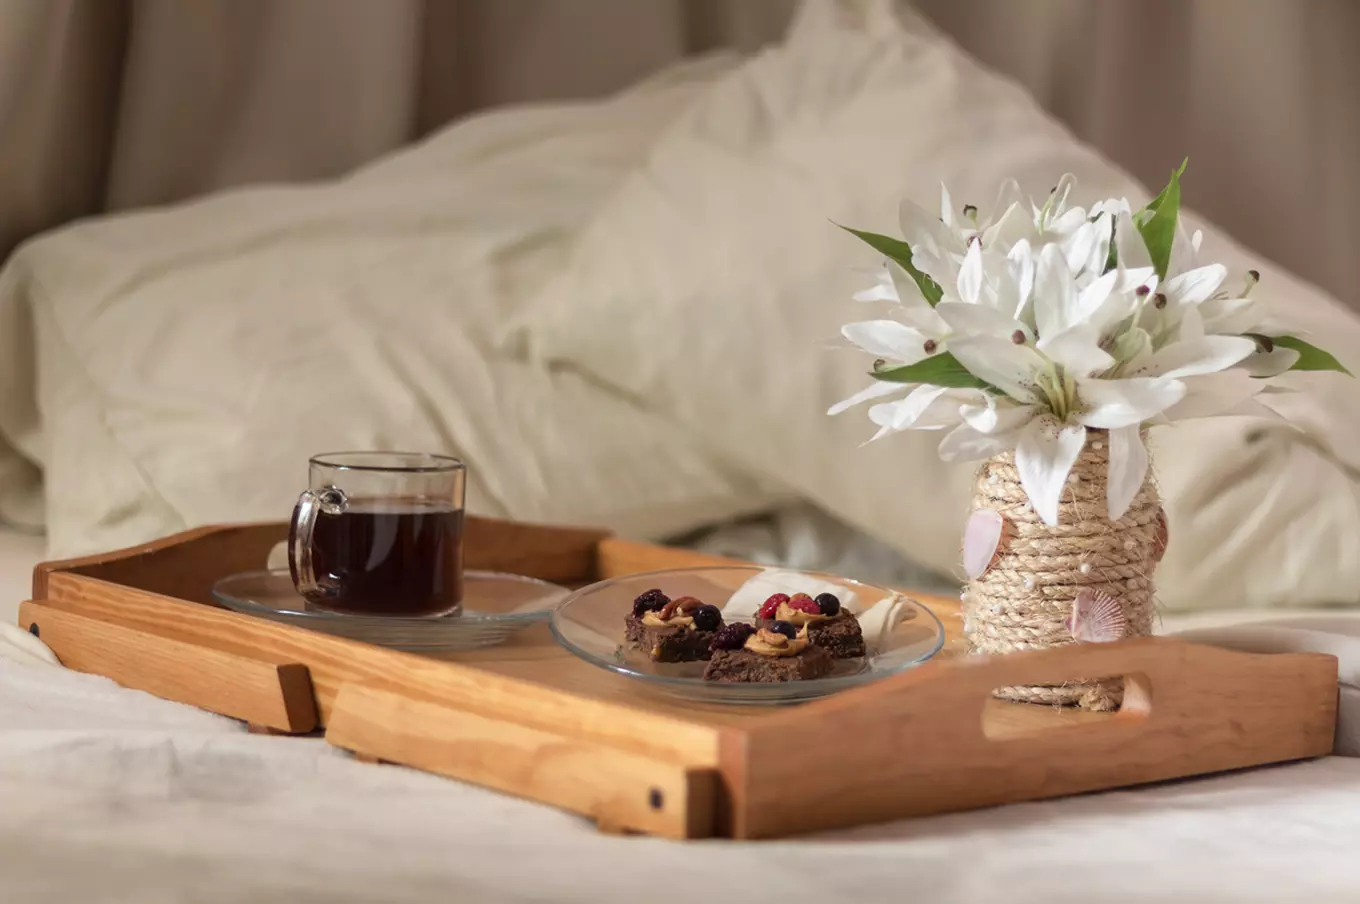 Bed and Breakfast photo showing food tray on bed